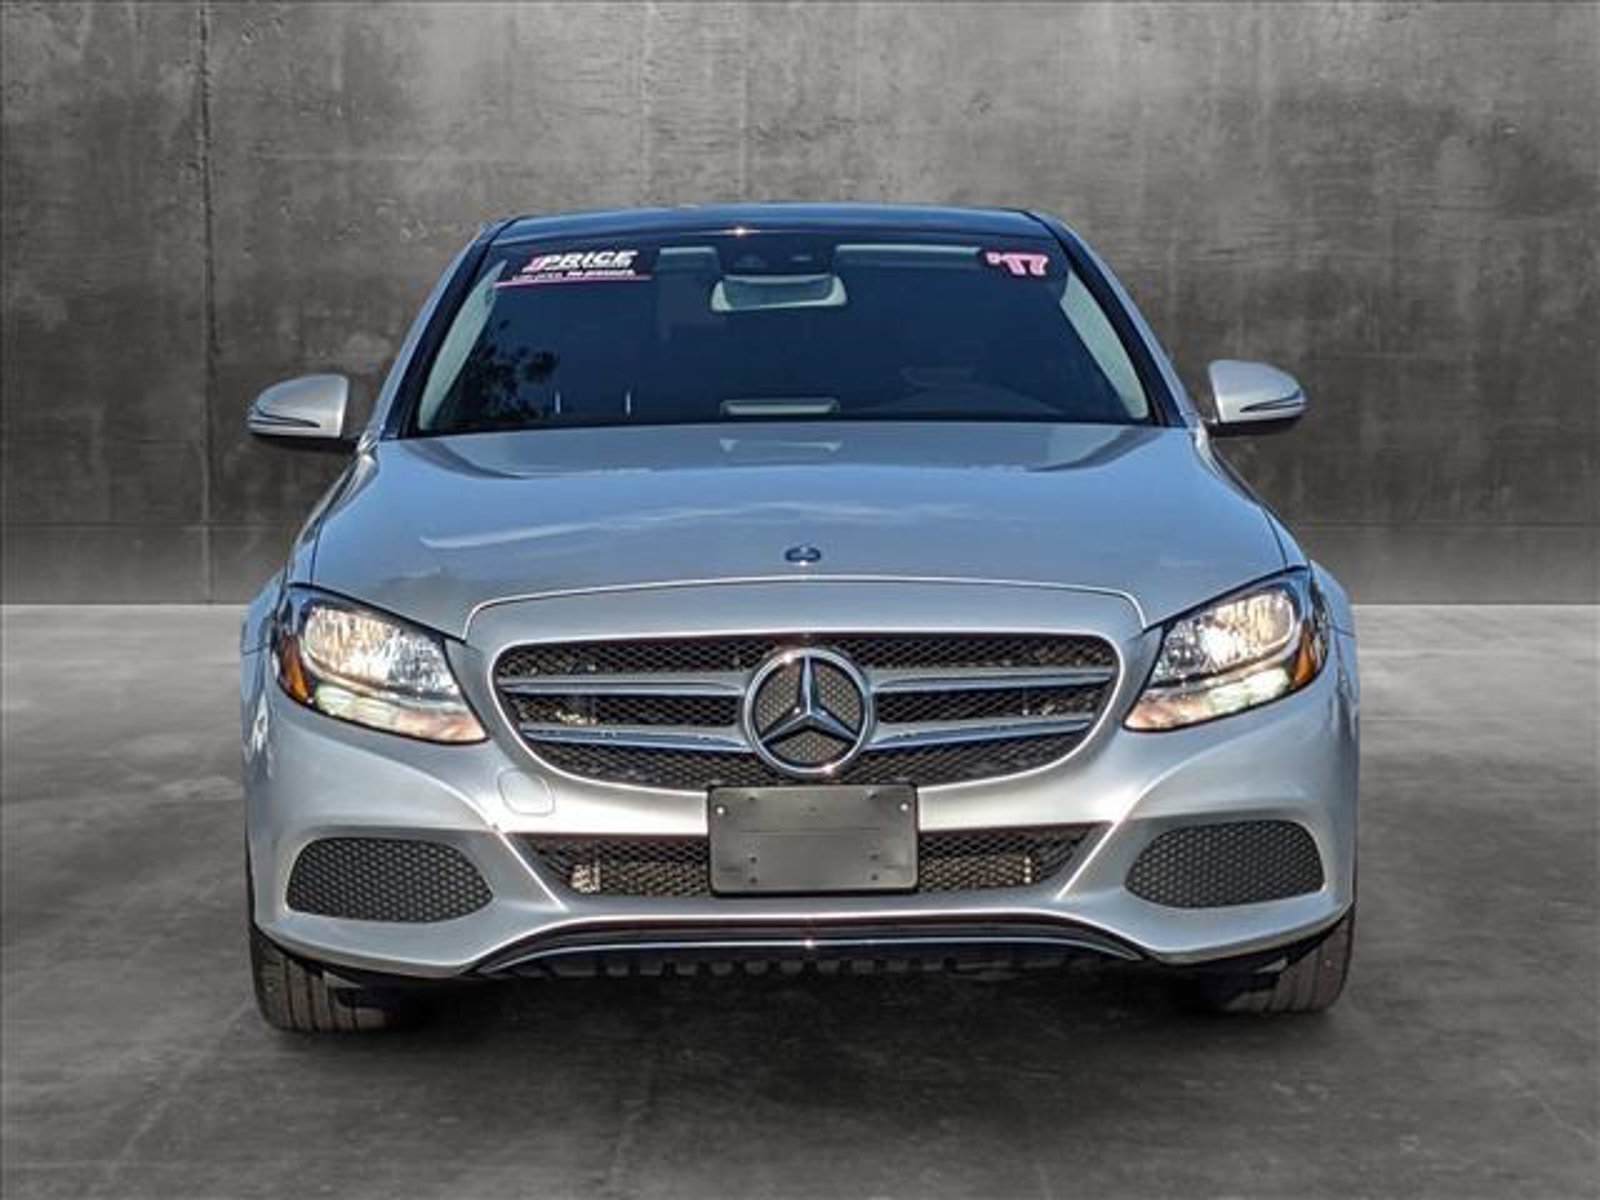 Used 2017 Mercedes-Benz C-Class C300 with VIN 55SWF4JB2HU210580 for sale in Clearwater, FL